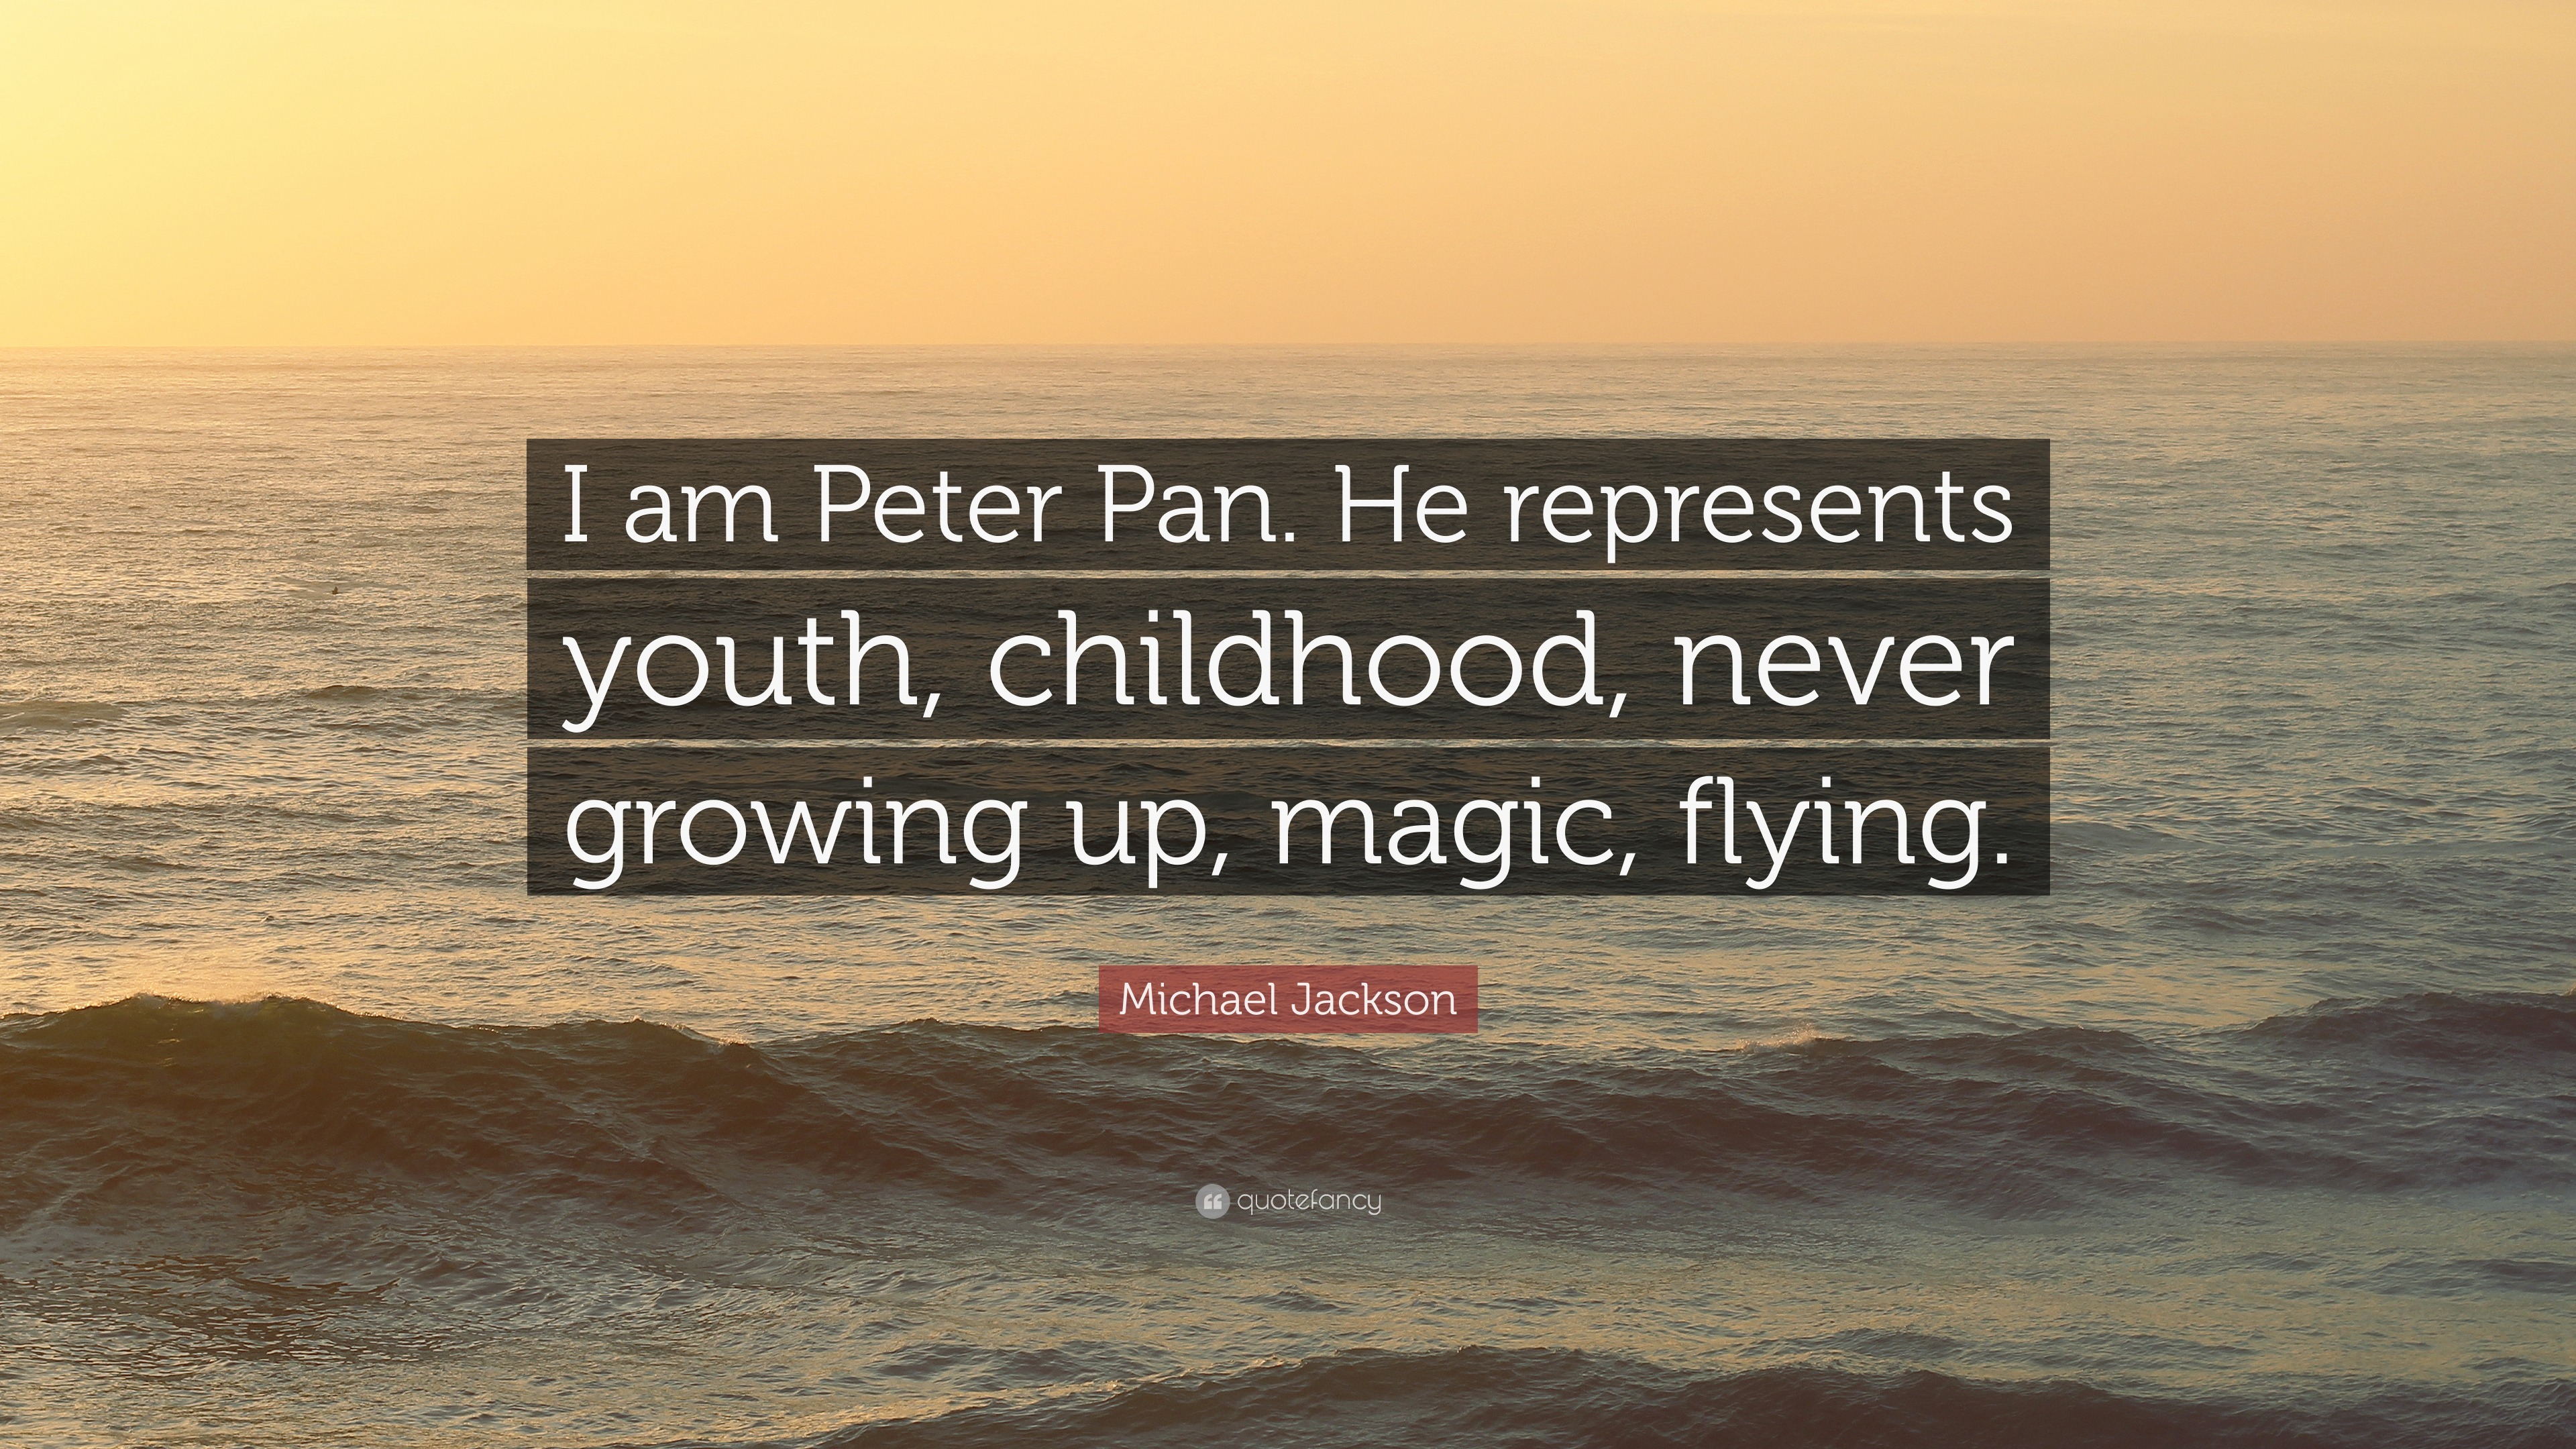 Michael Jackson Quote: "I am Peter Pan. He represents ...